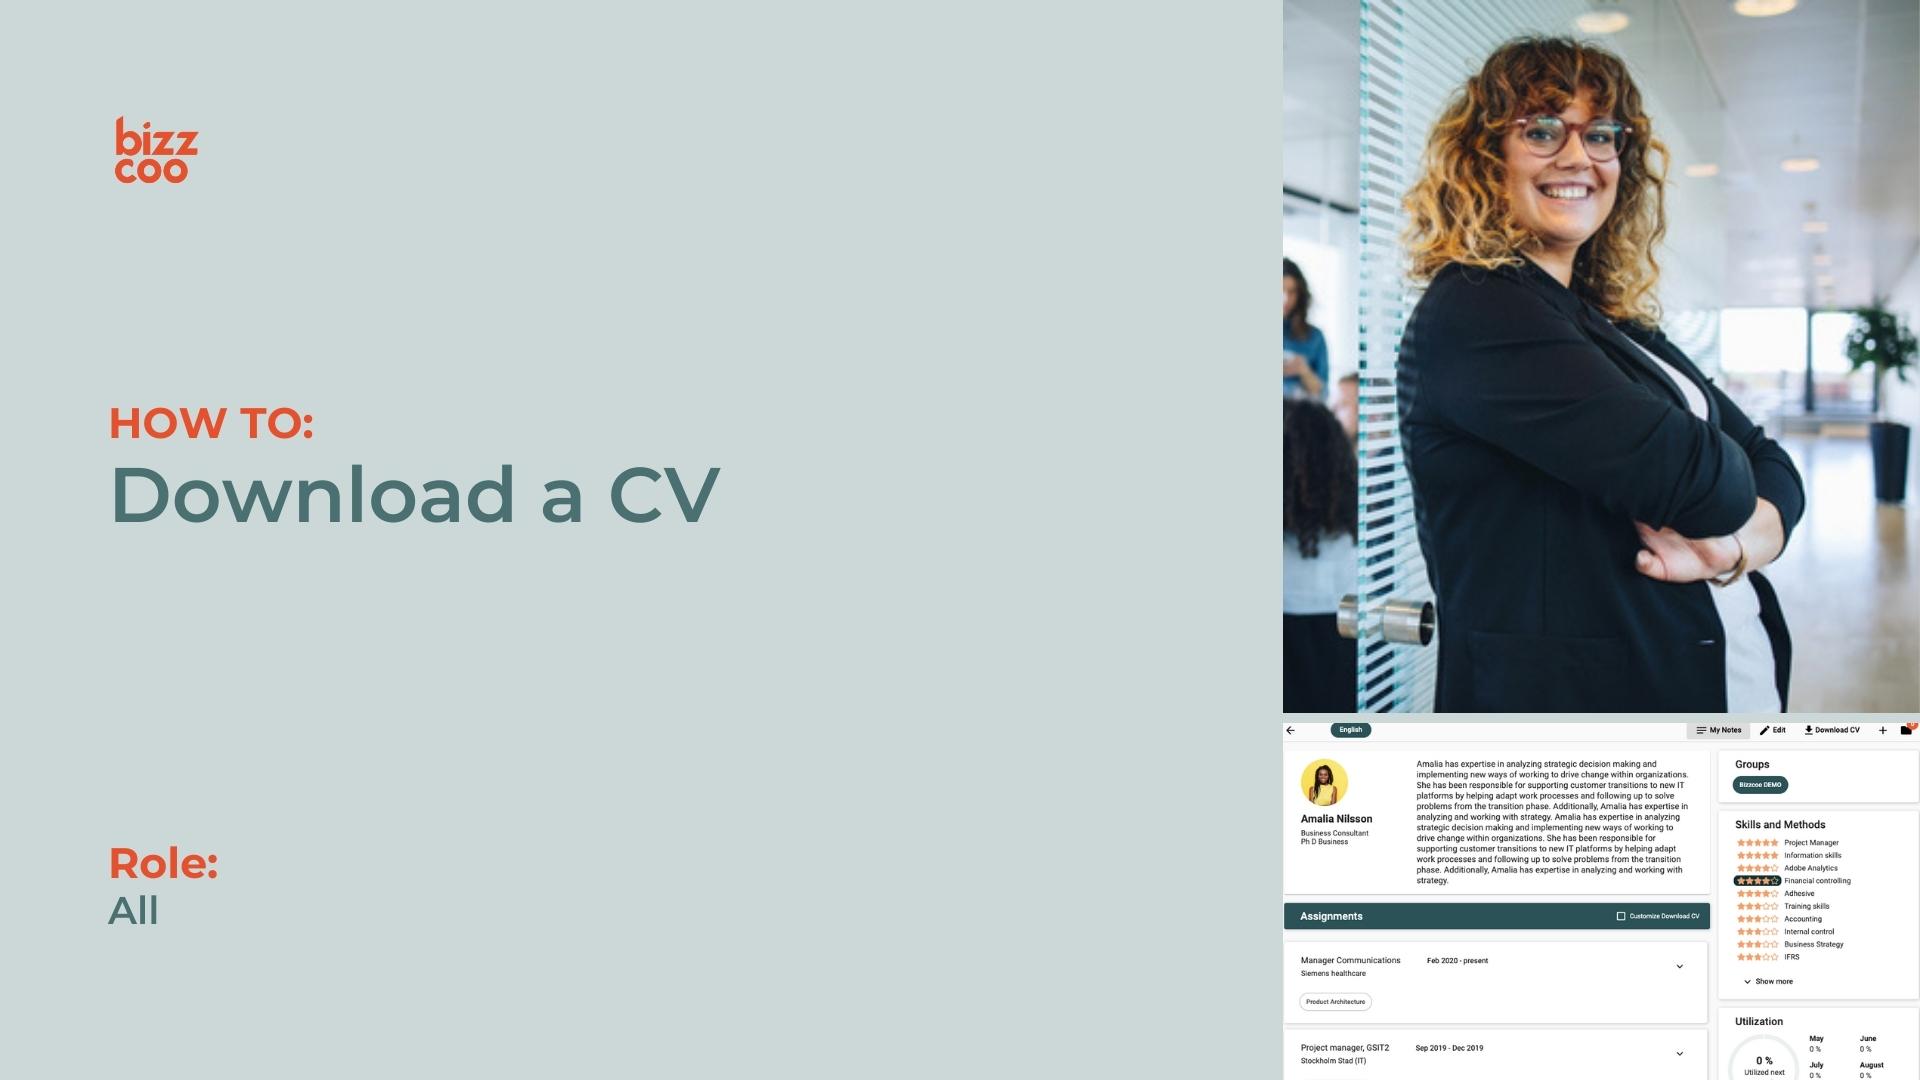 How to download a CV